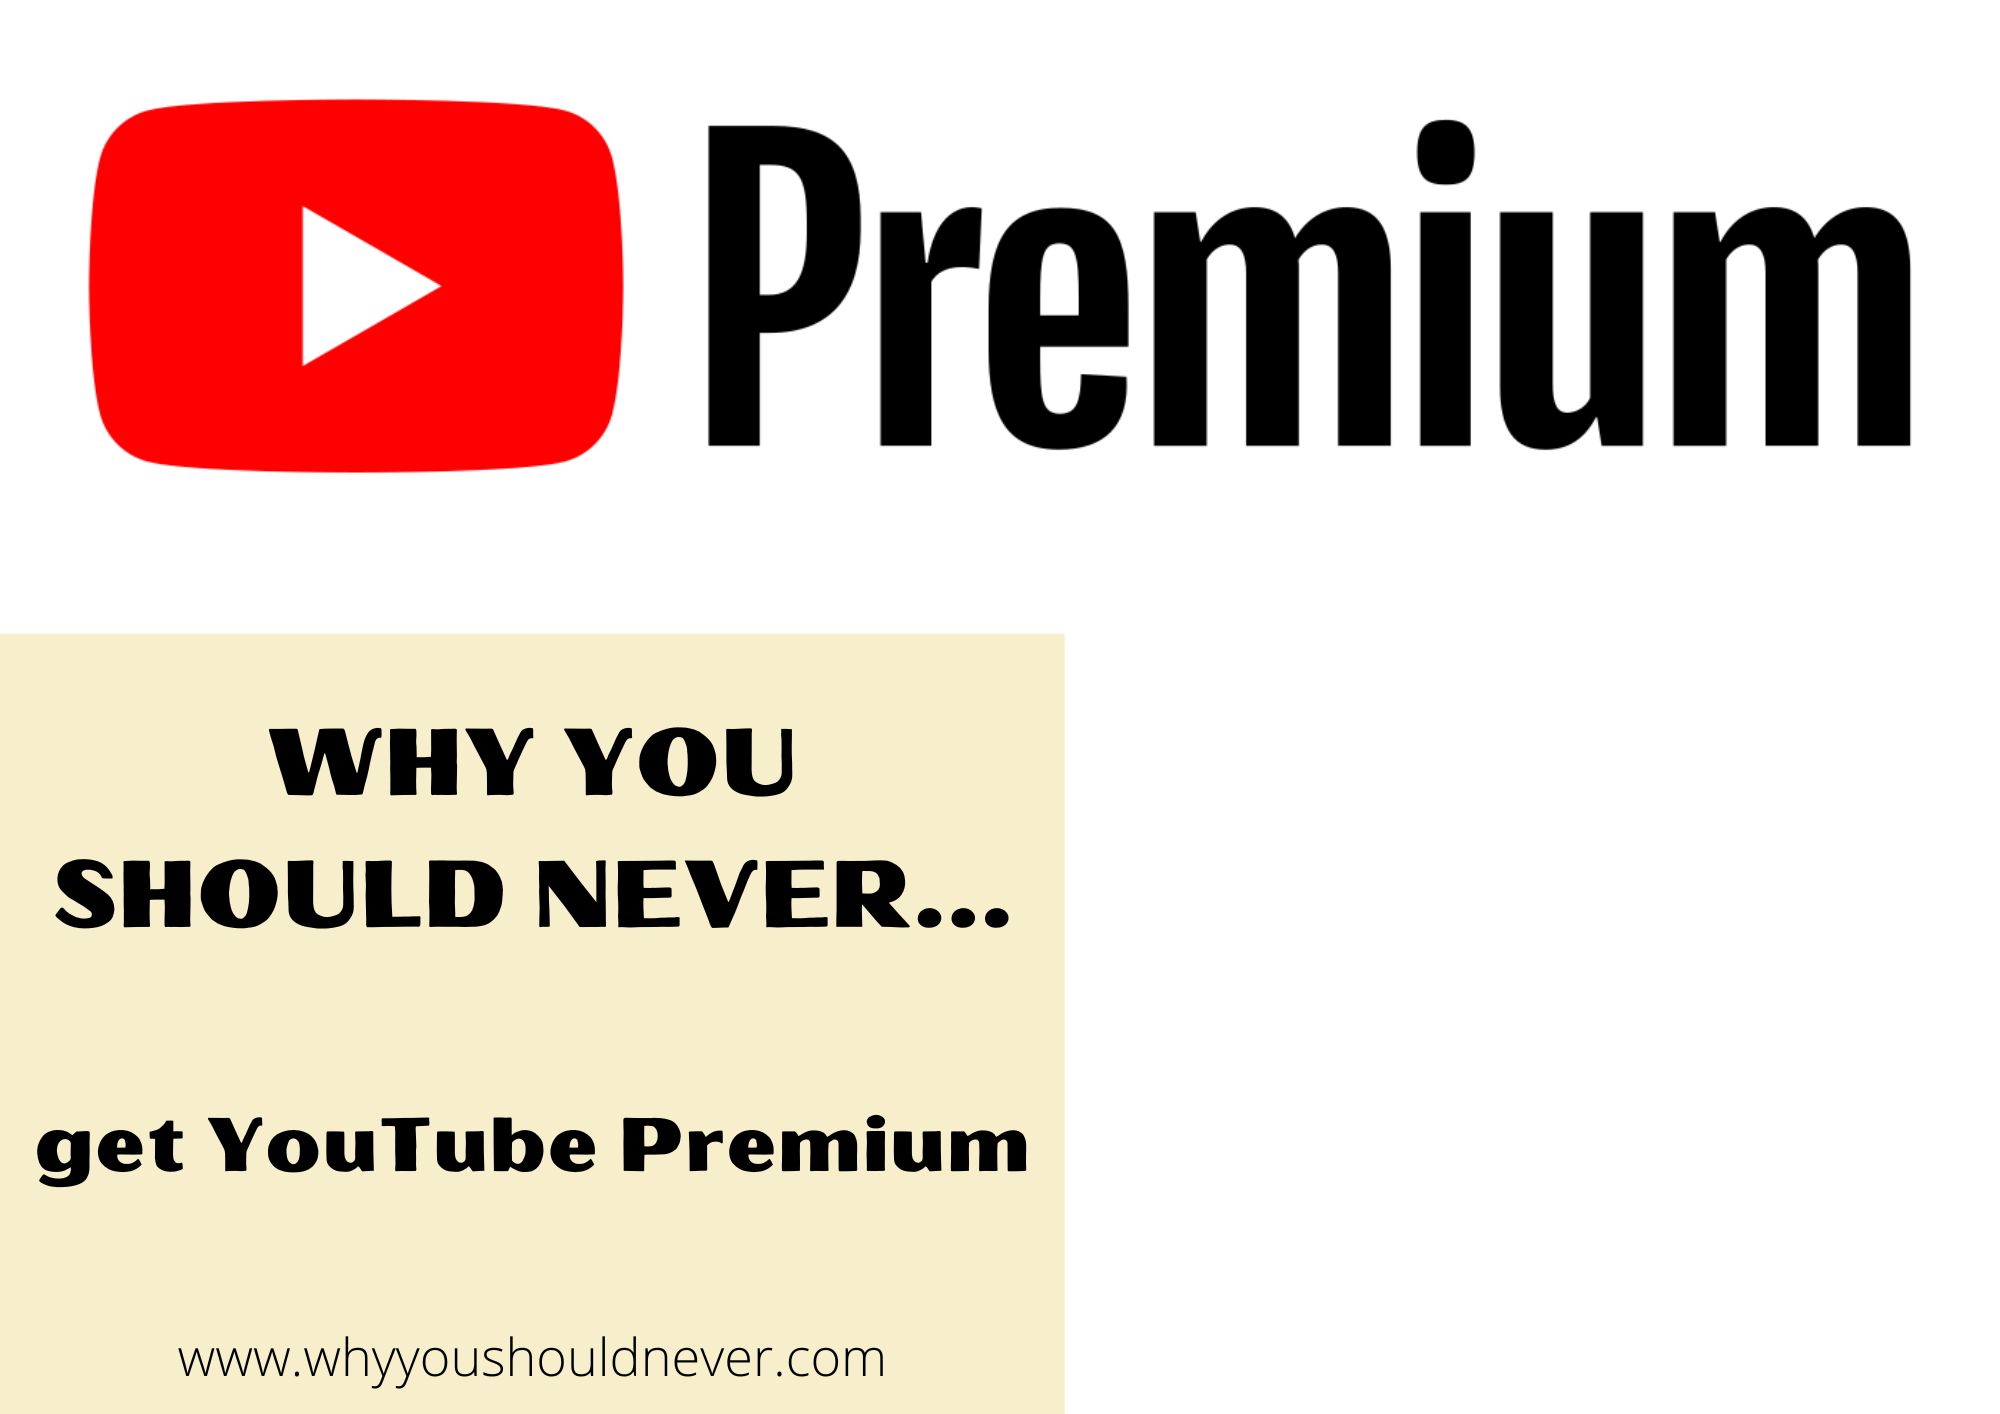 Why You Should Never Get YouTube Premium